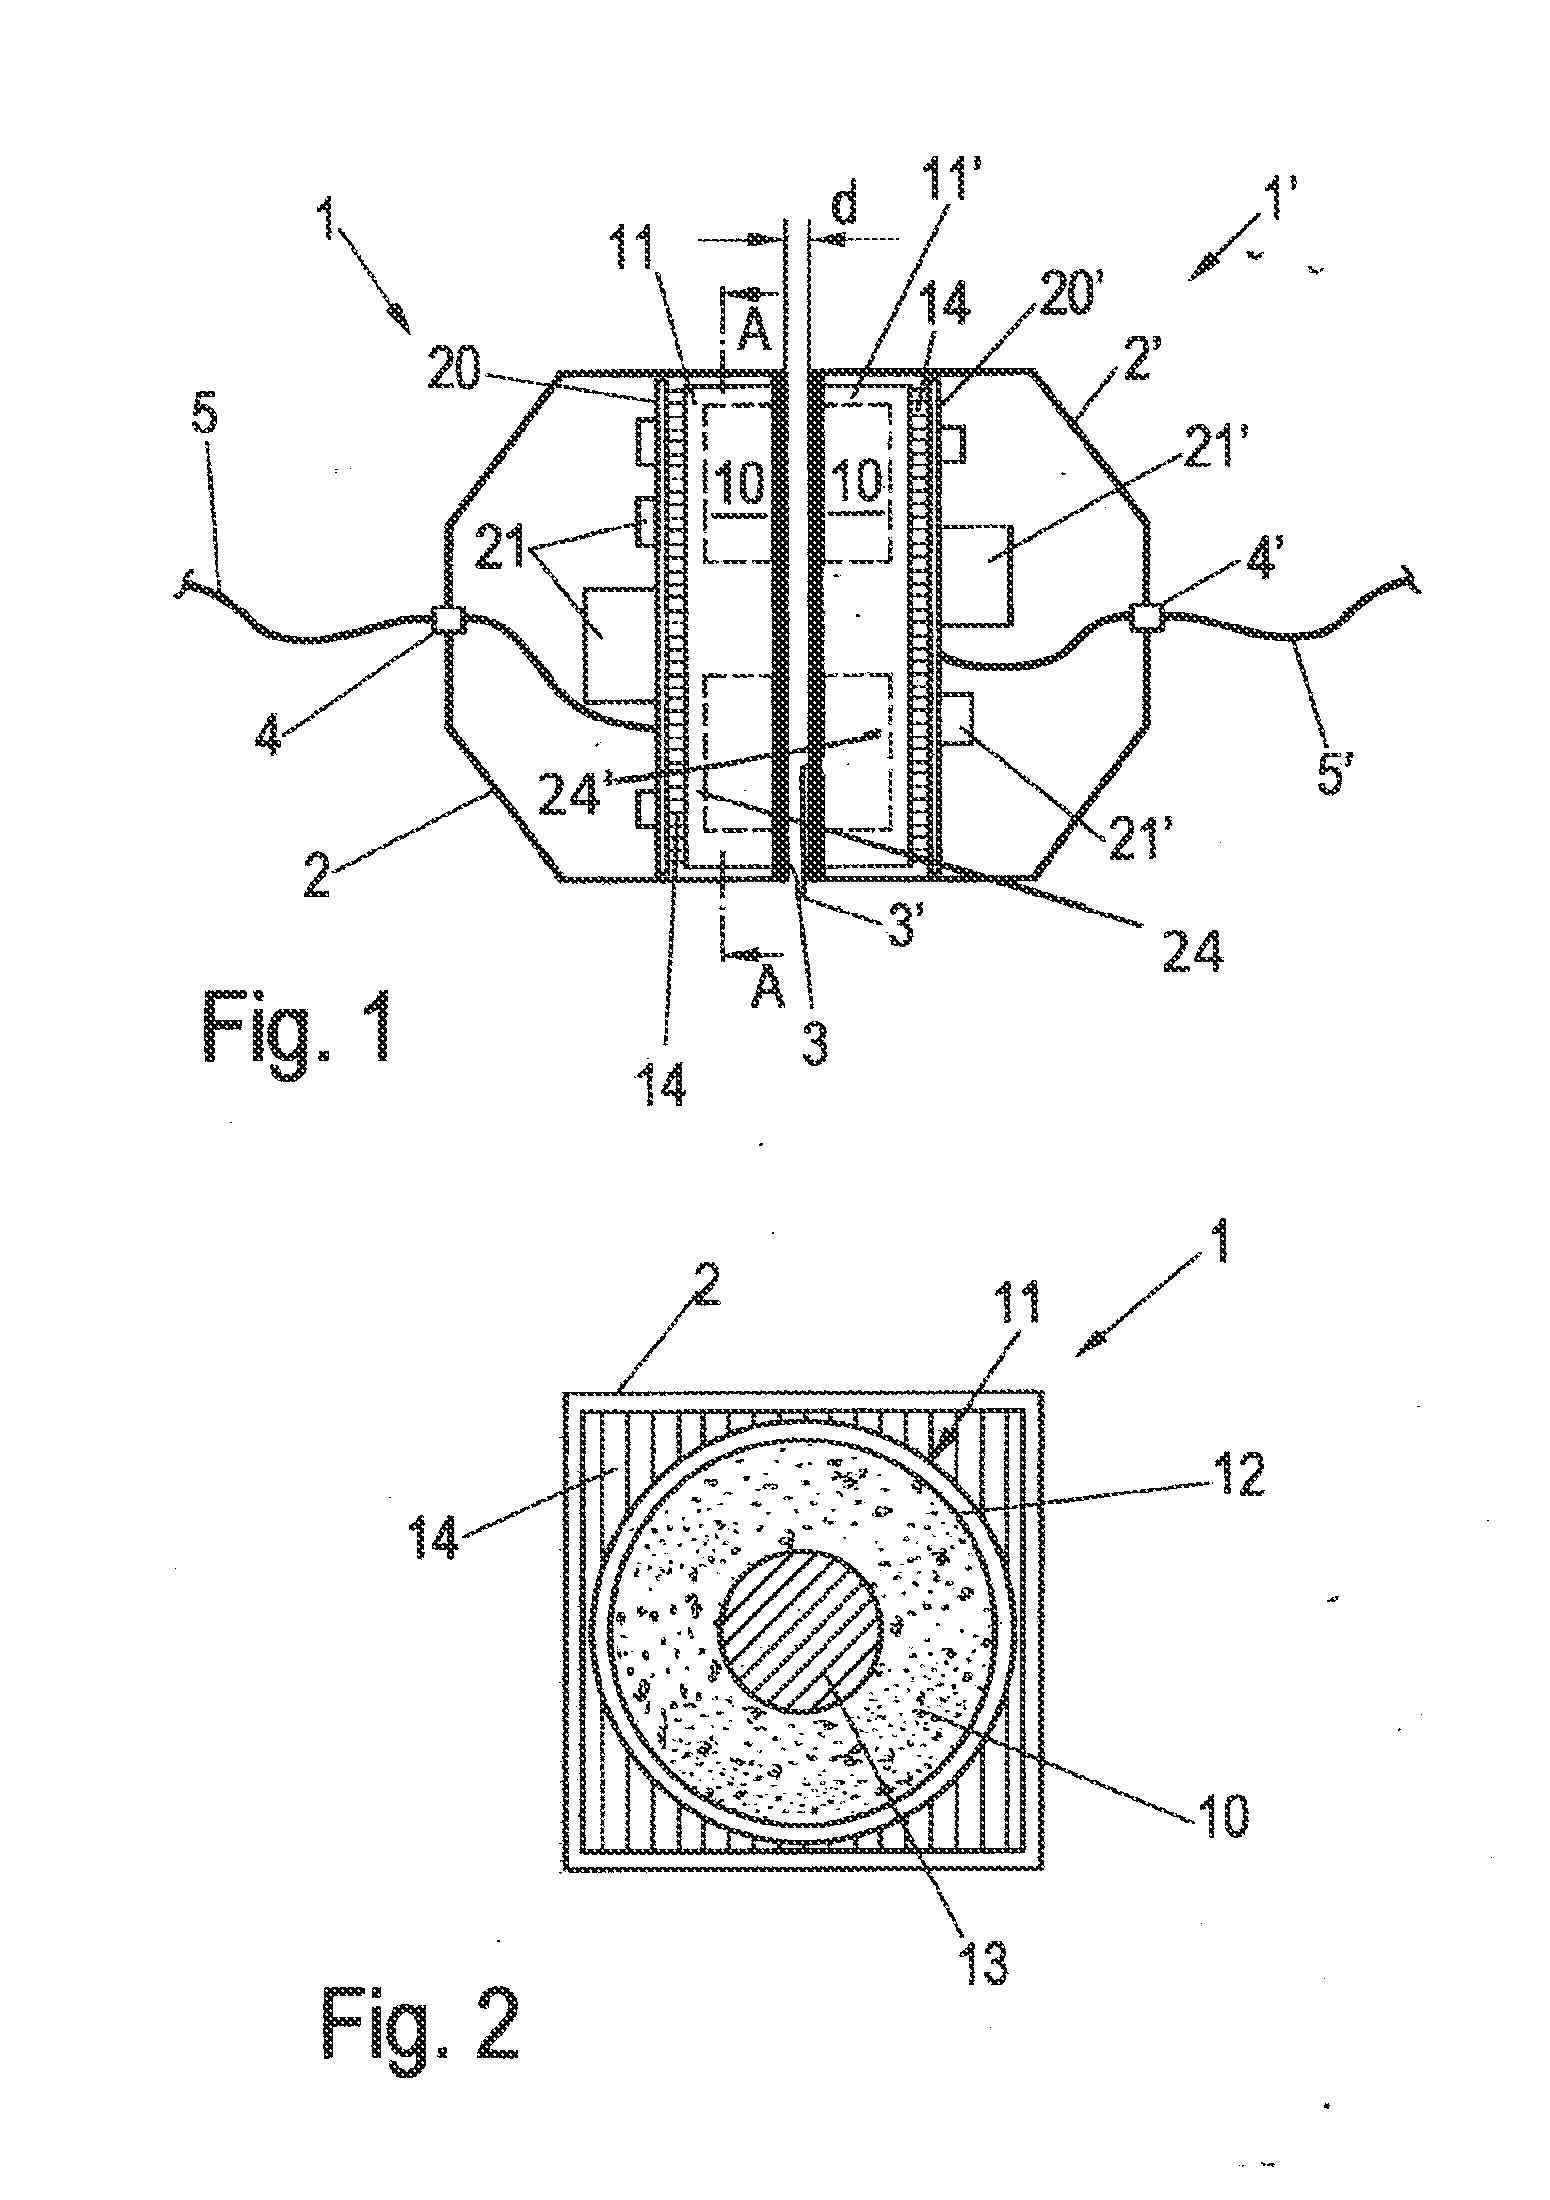 Plug device for contact-free inductive energy transfer and operating method for such a plug device